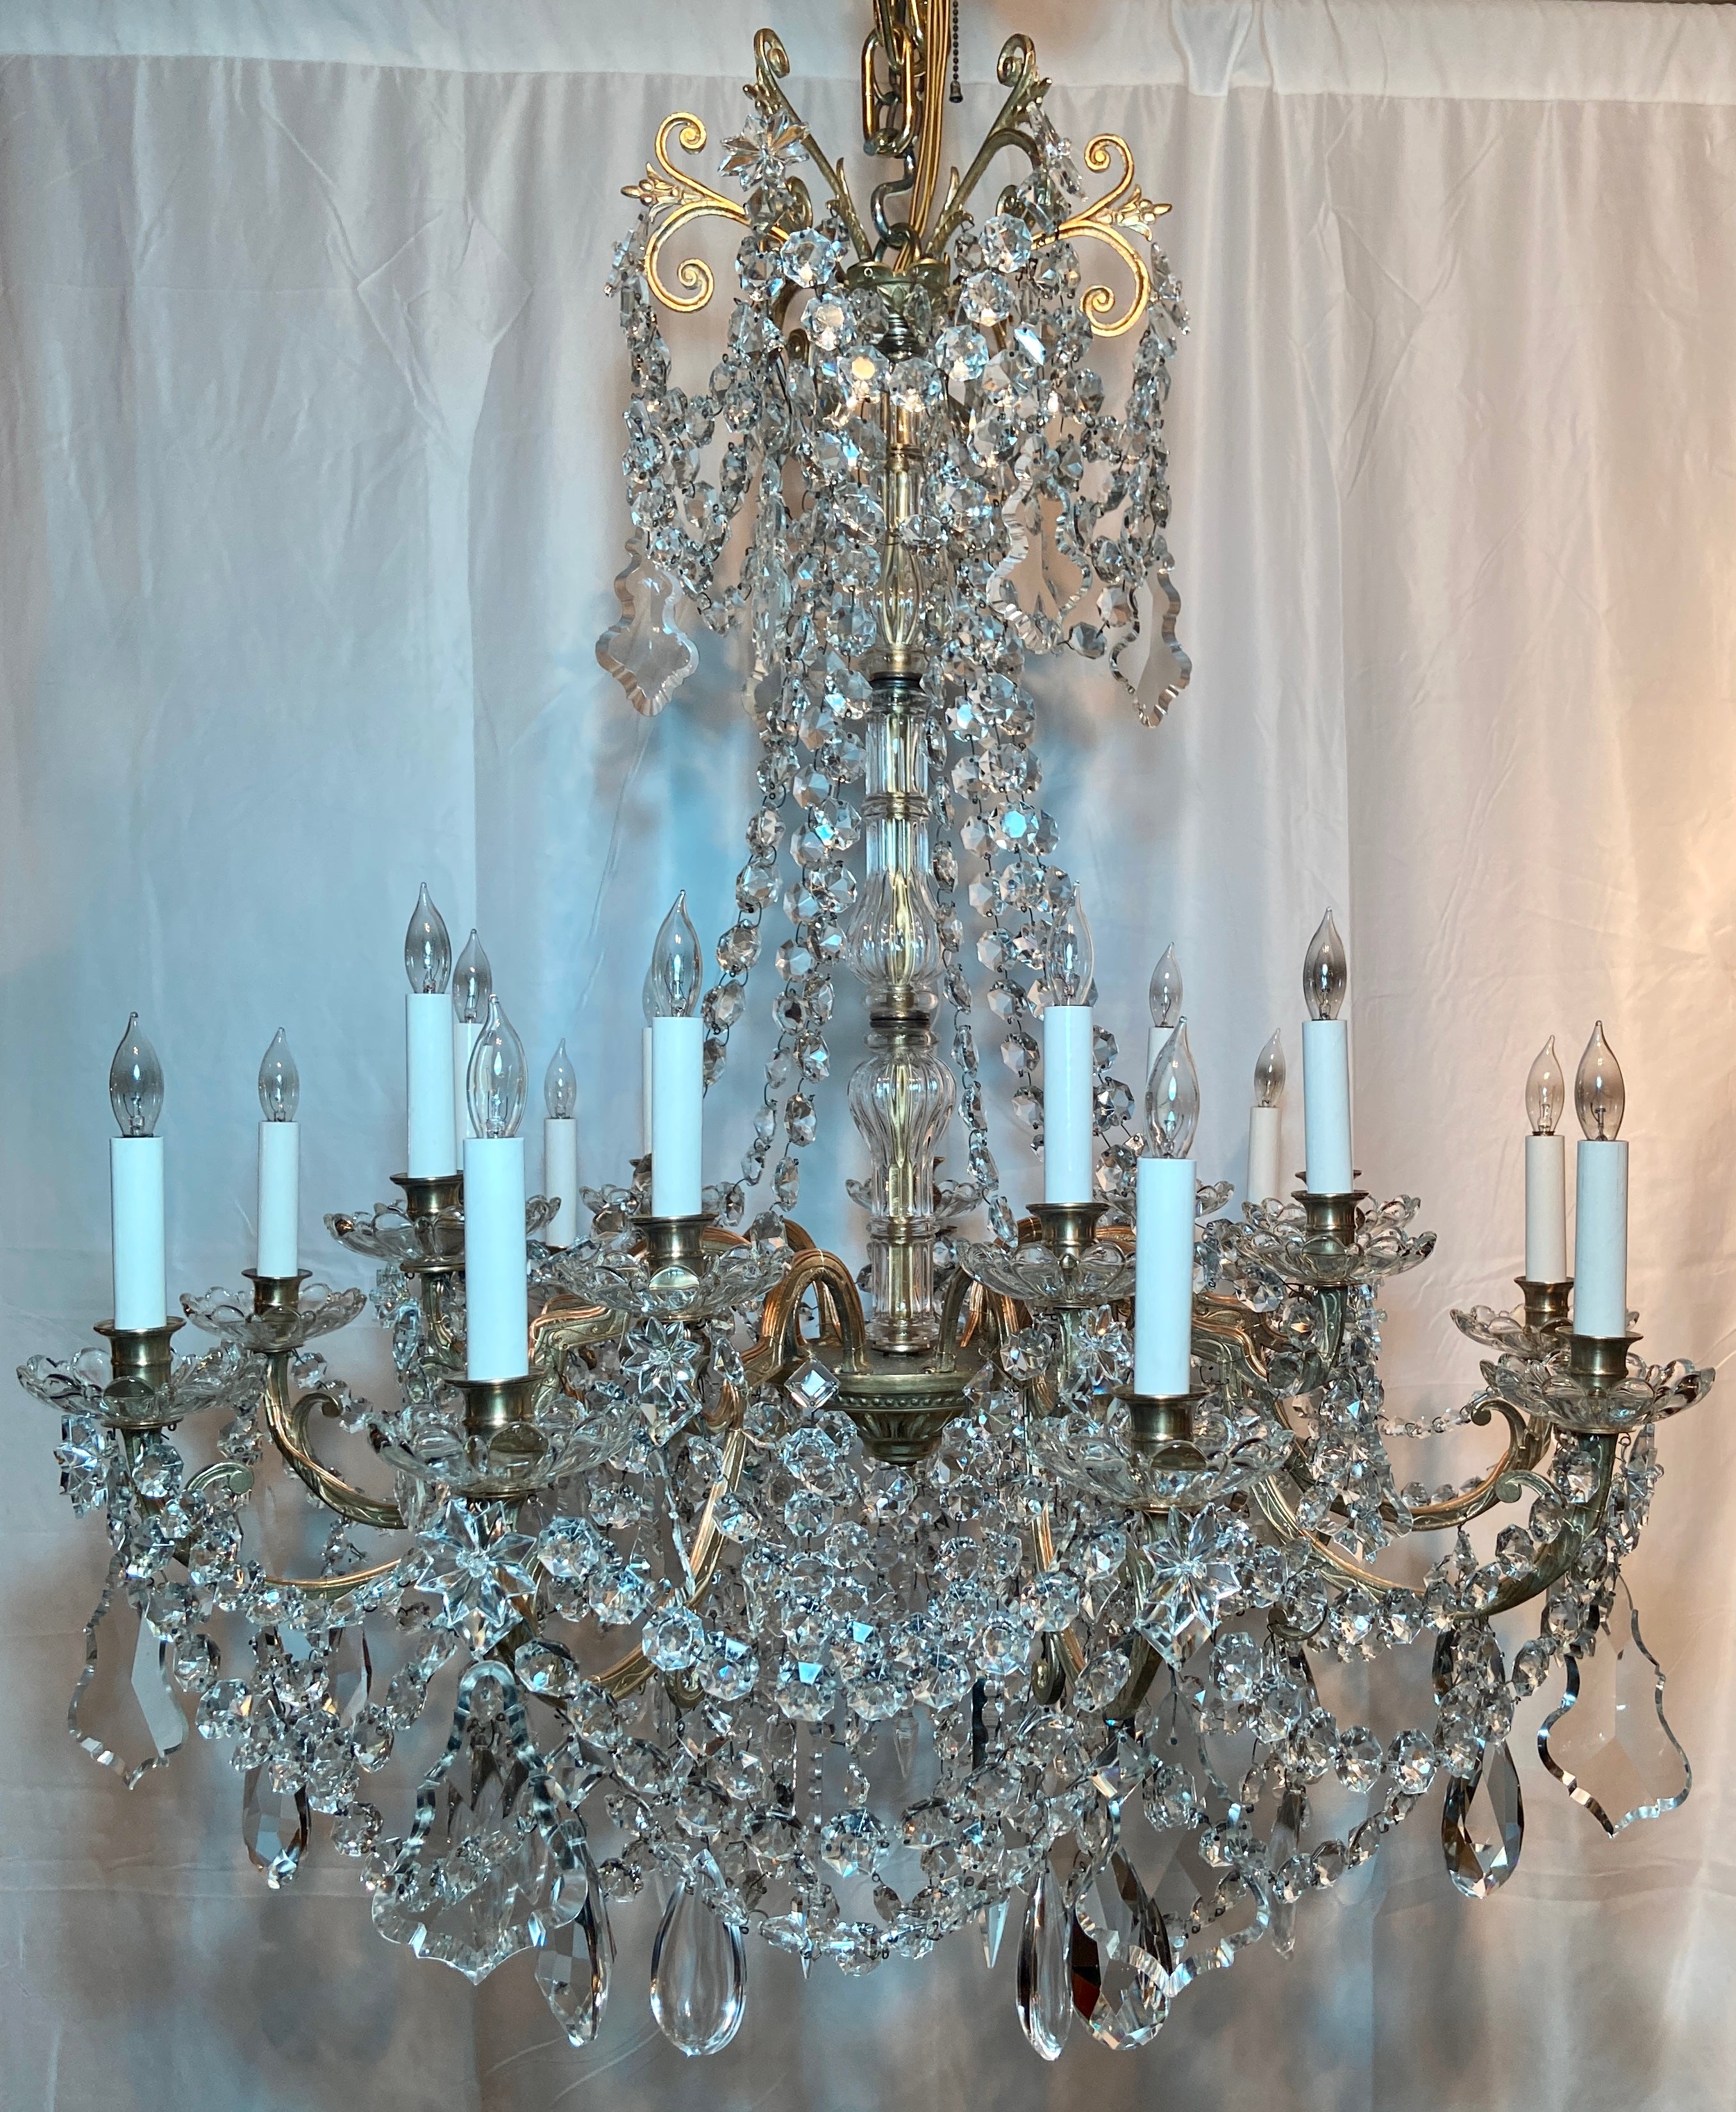 Antique French gold bronze and crystal 18-light chandelier, circa 1920-1930.